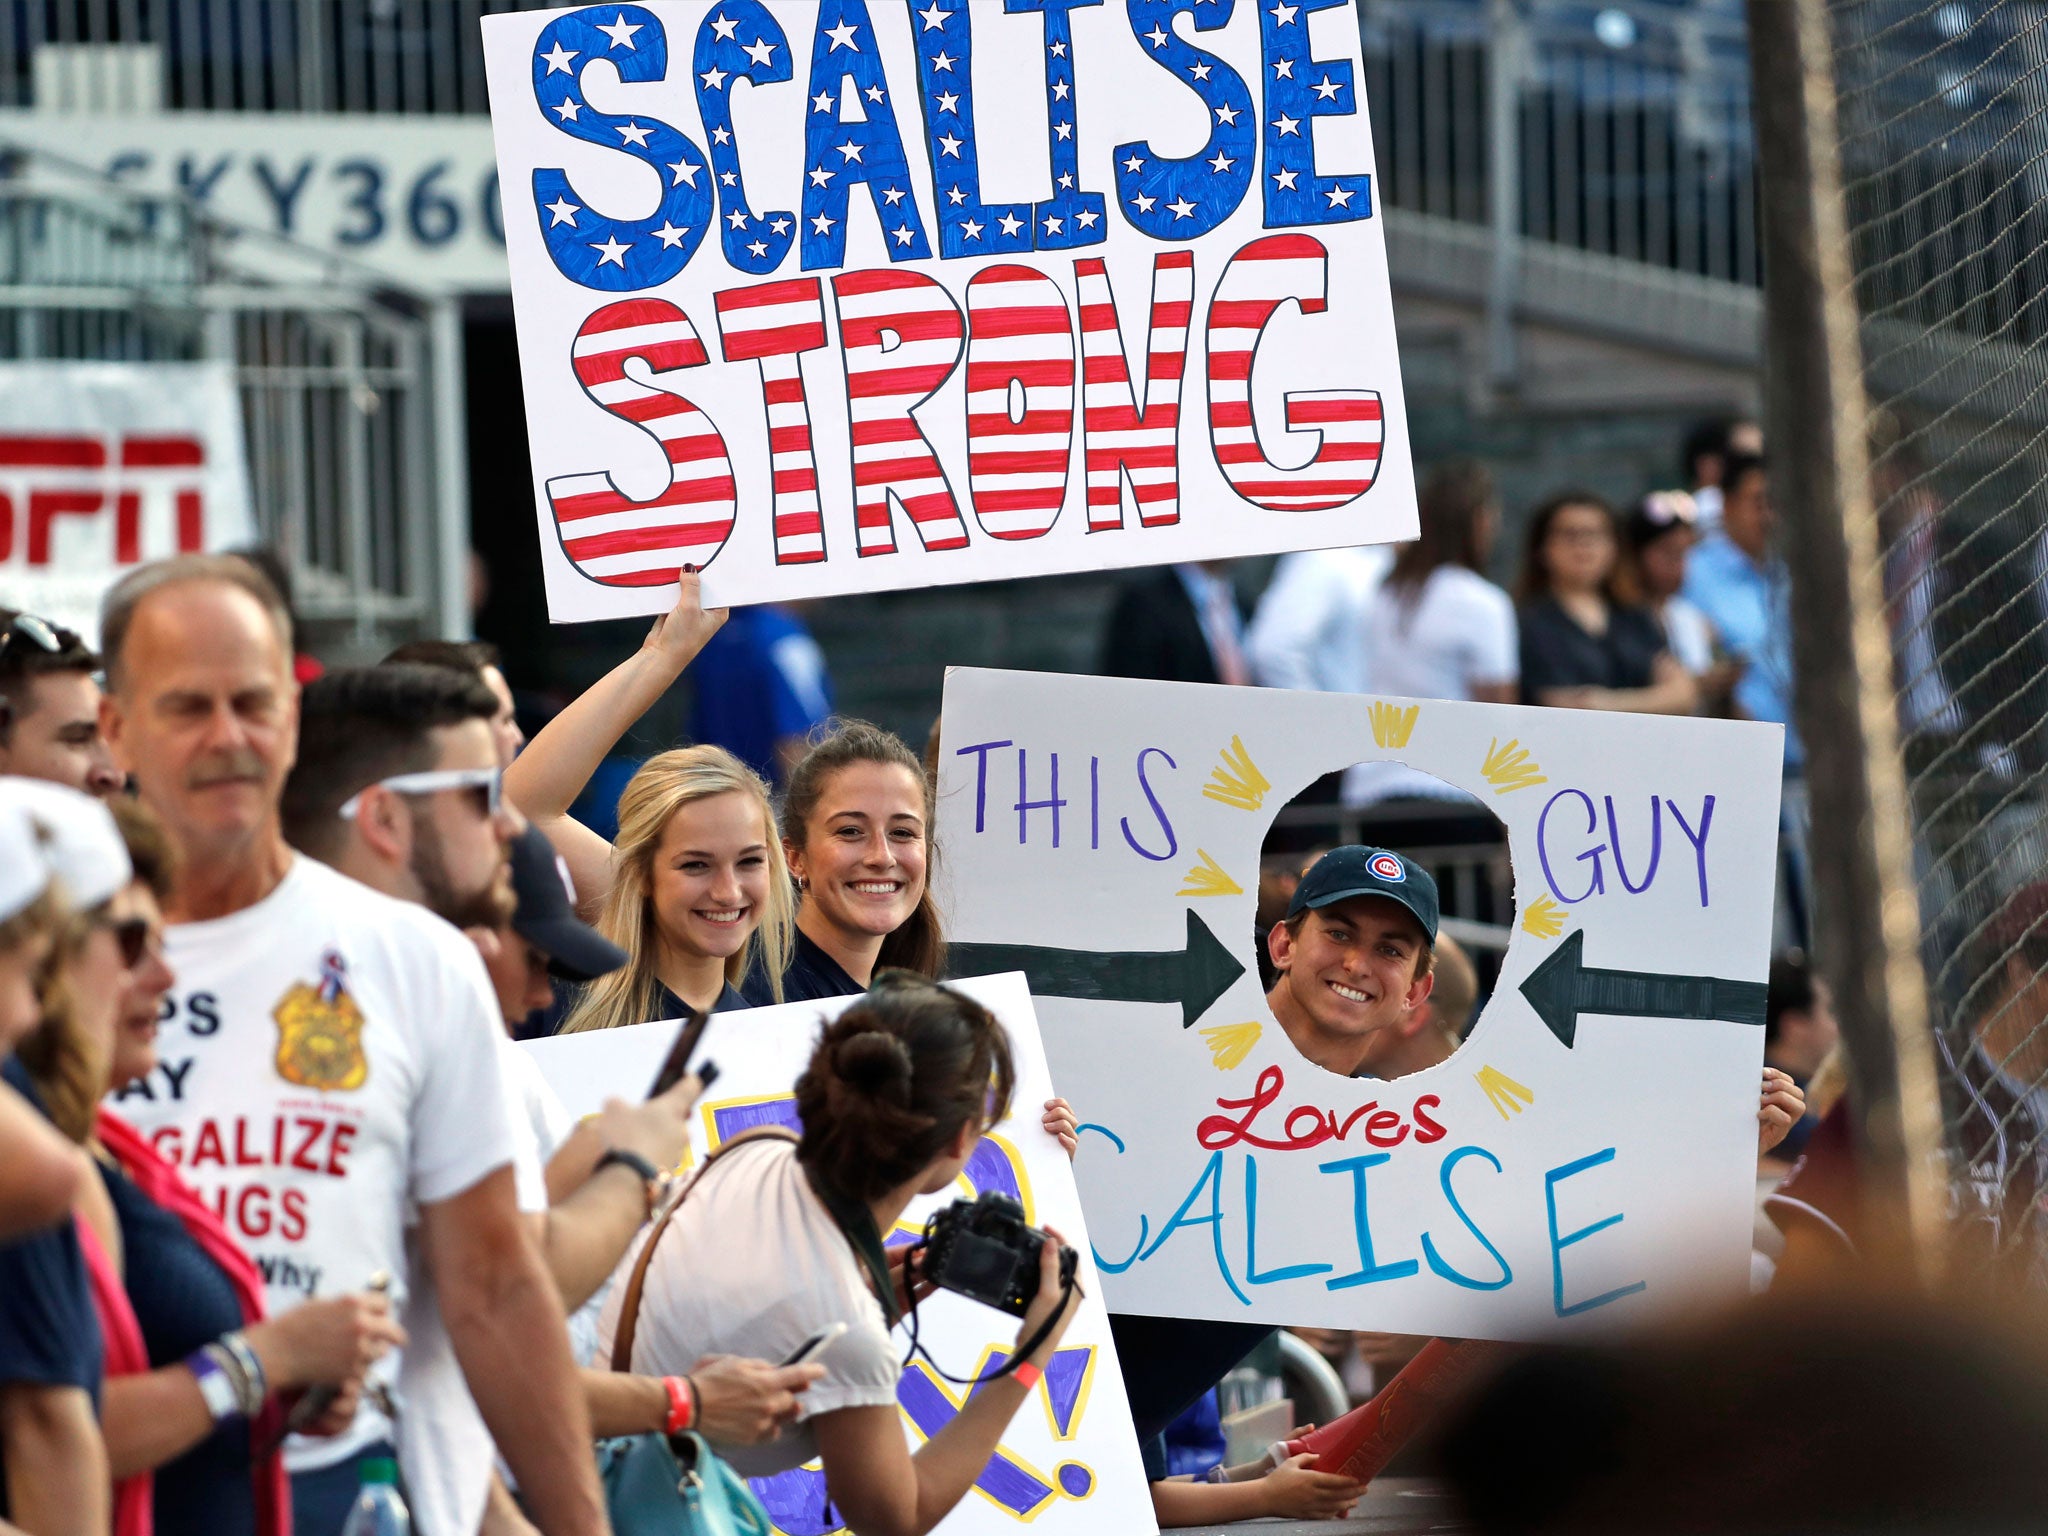 Supporters of Steve Scalise hold signs before the annual baseball game